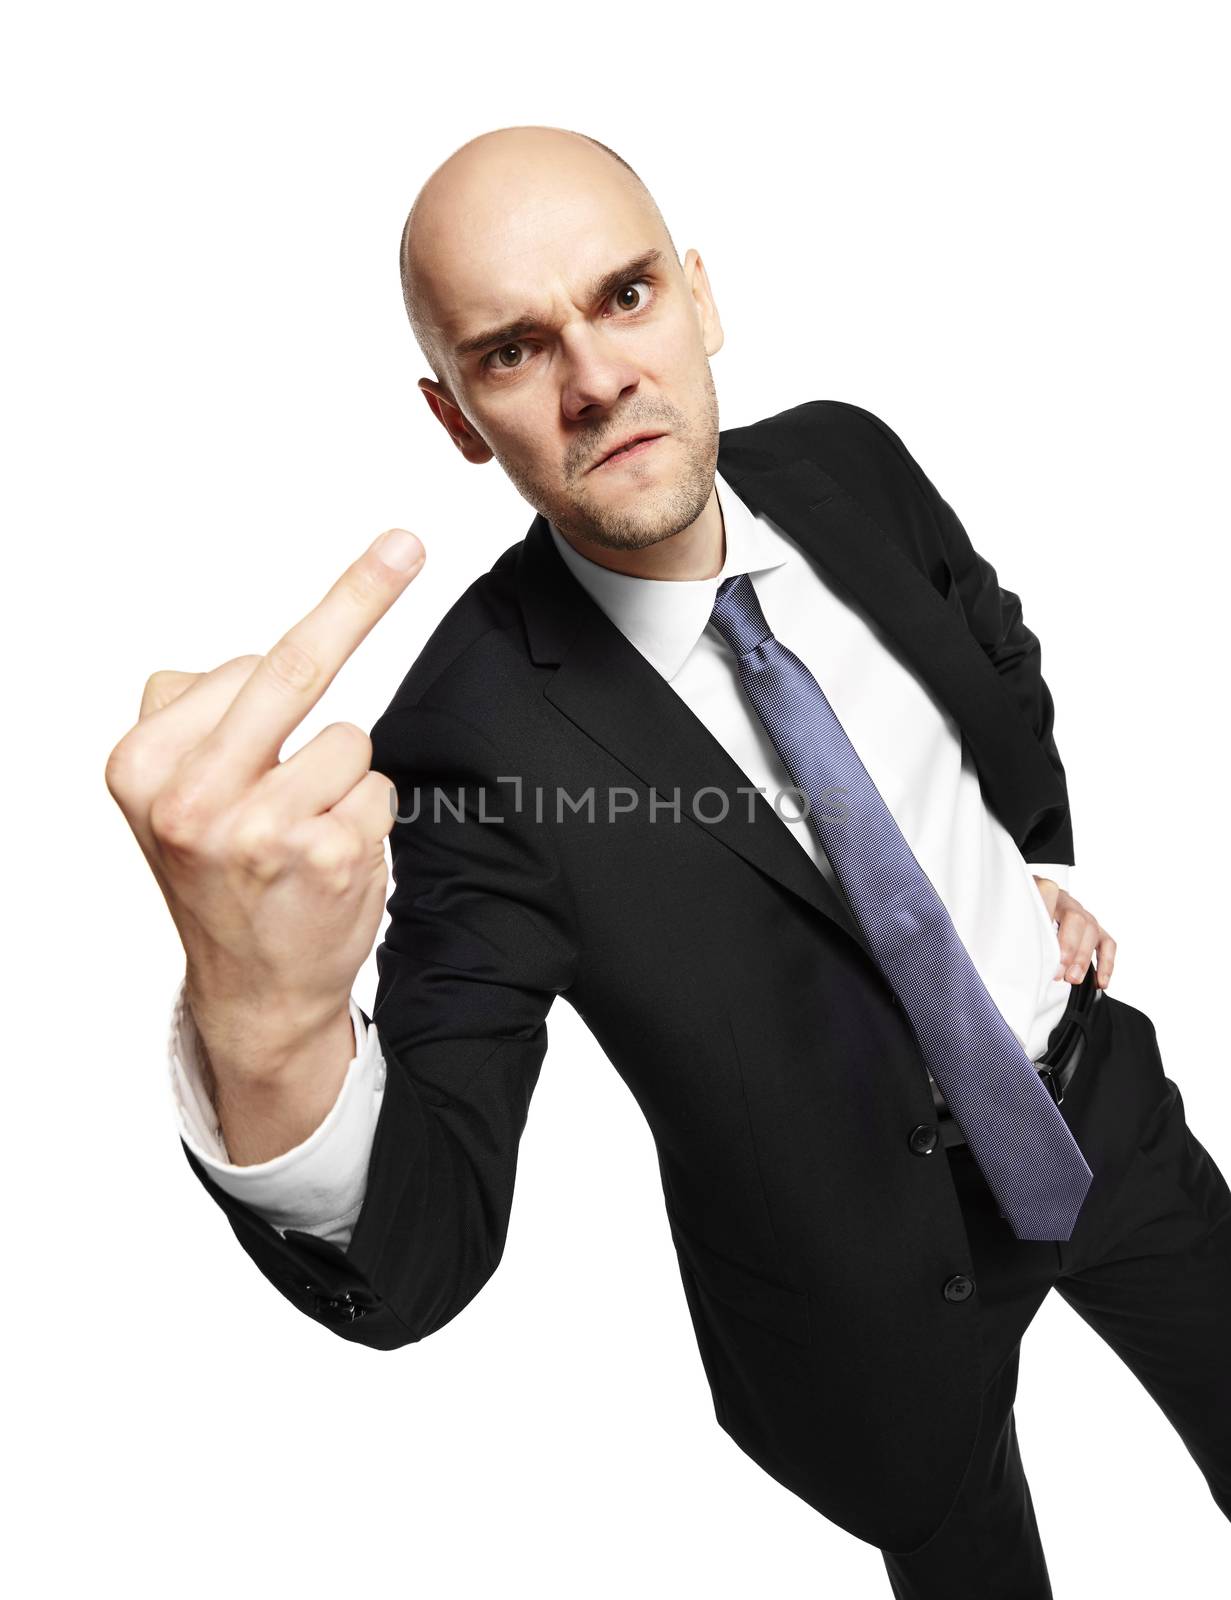 Angry young businessman shows middle finger. Studio shot isolated on white background. 